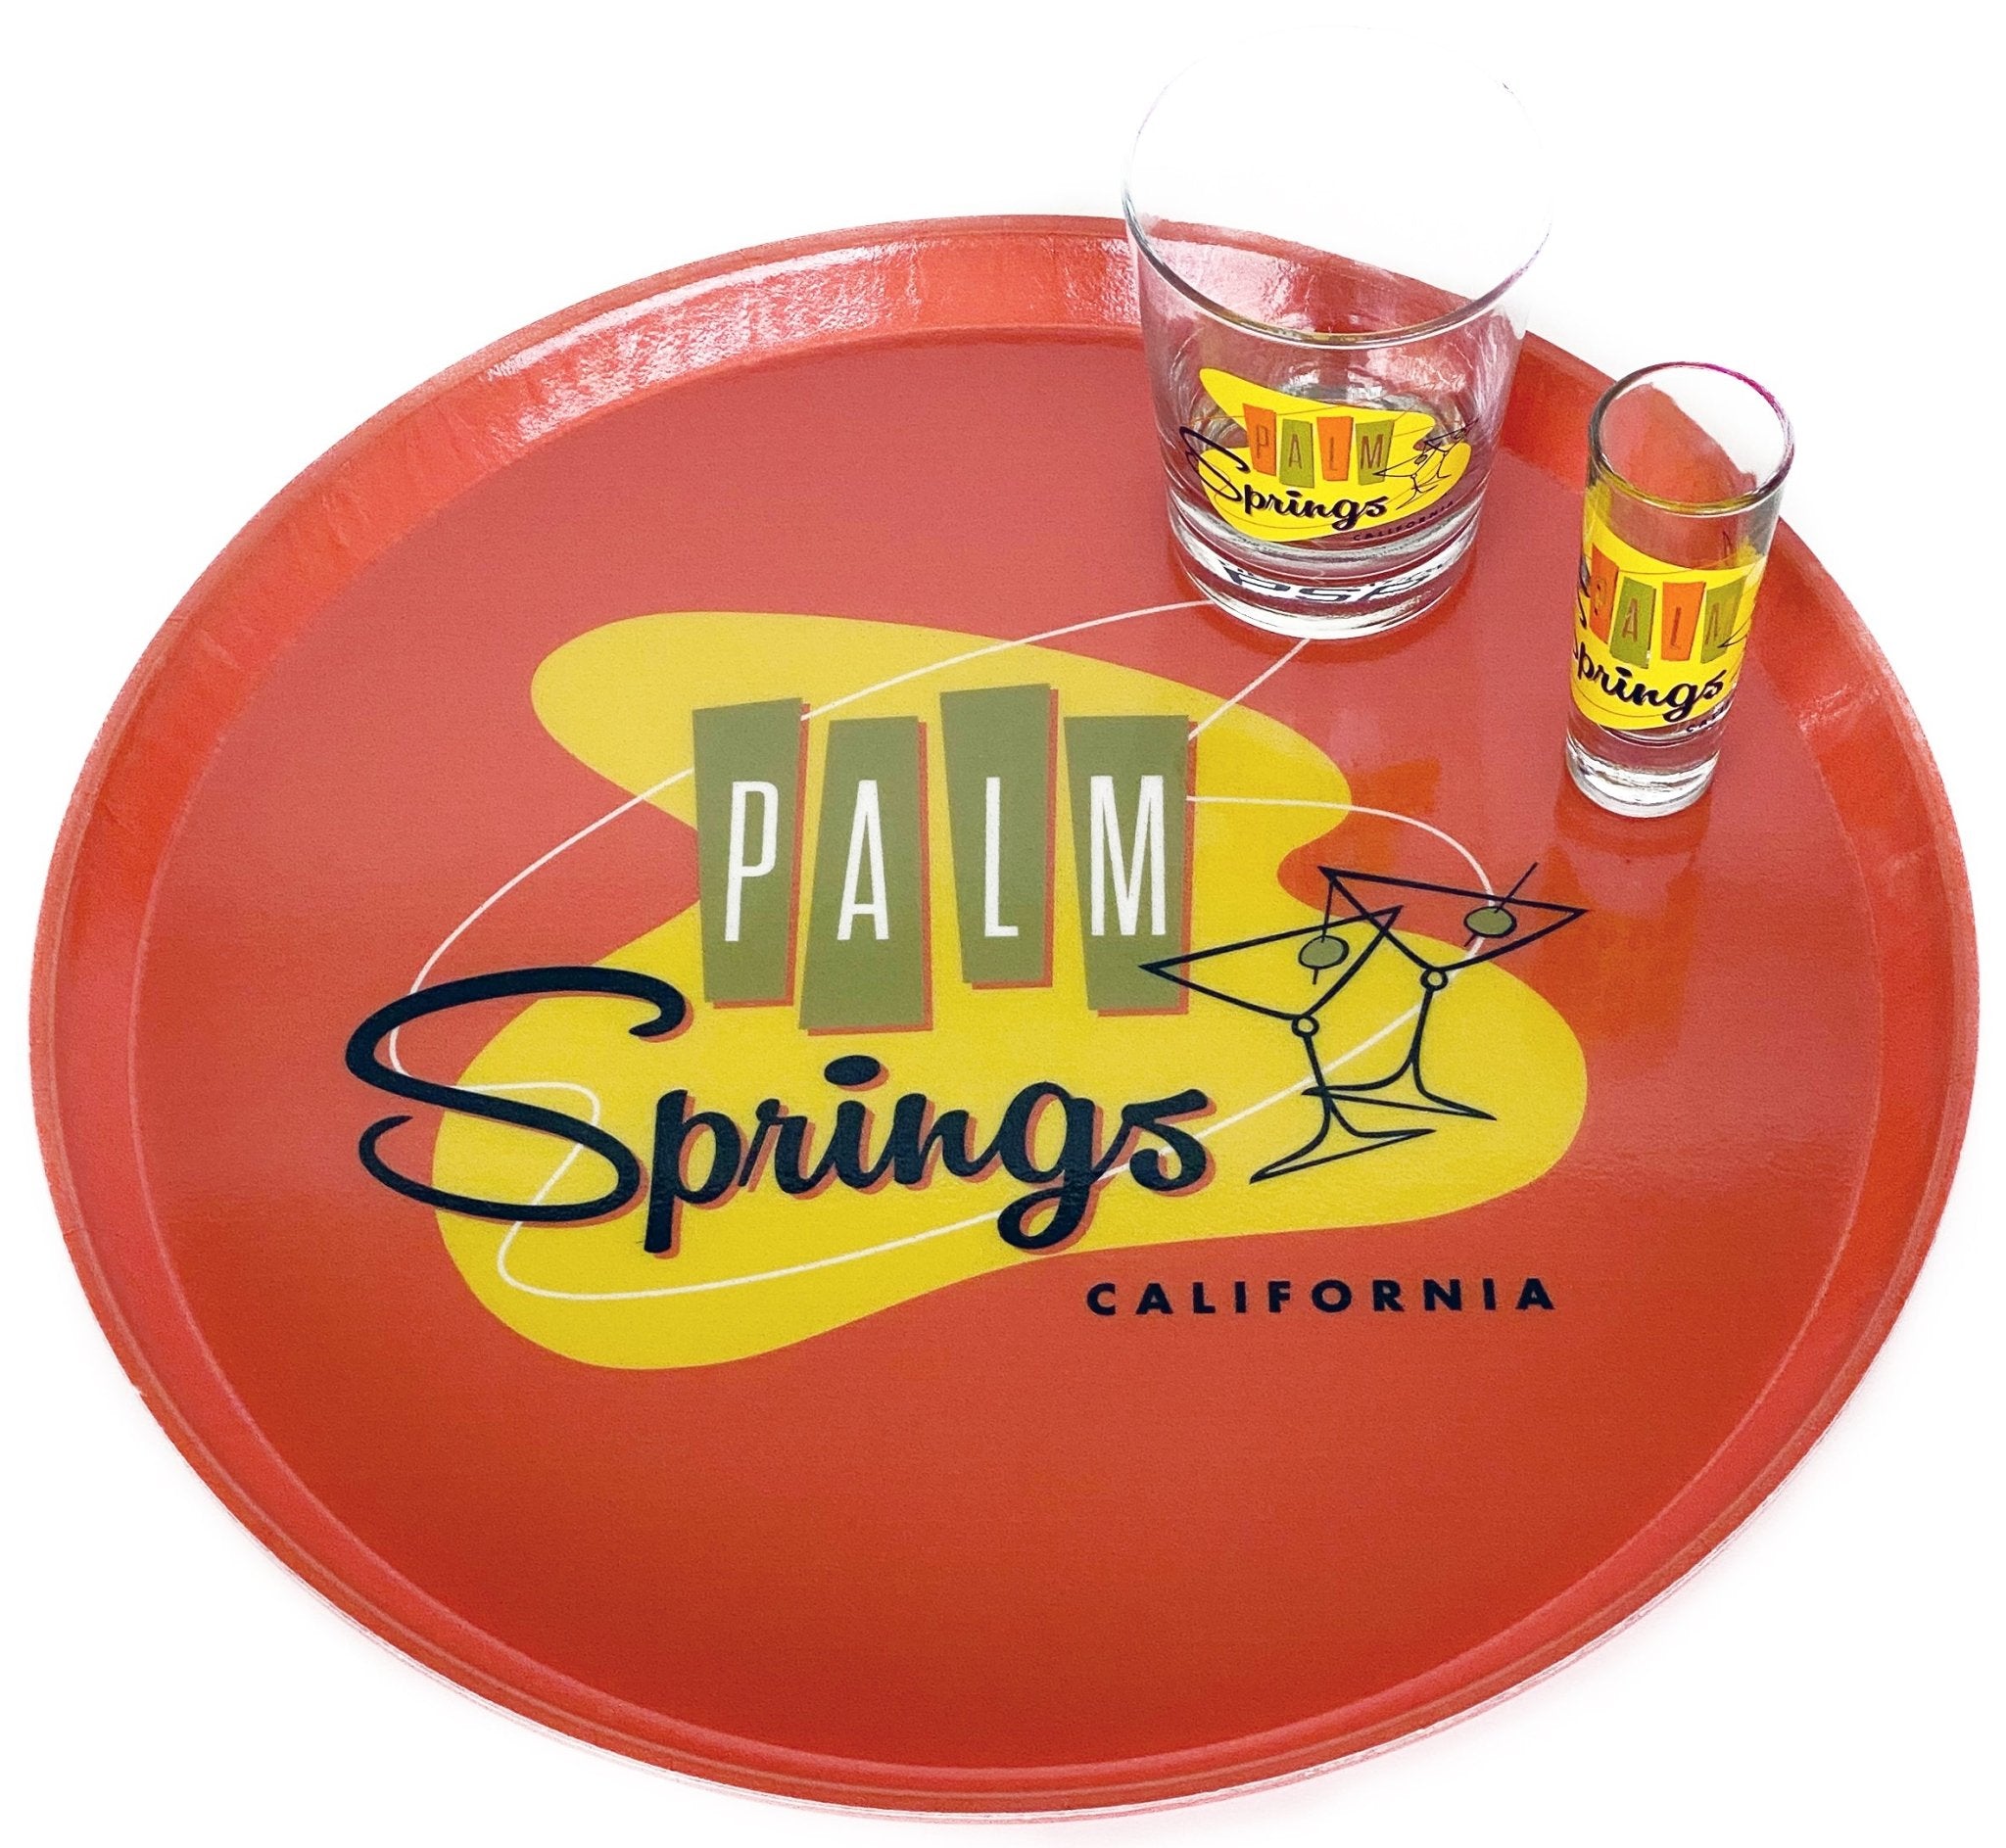 round orange tray with retro design that says Palm Springs California and shows two martini glasses with olives